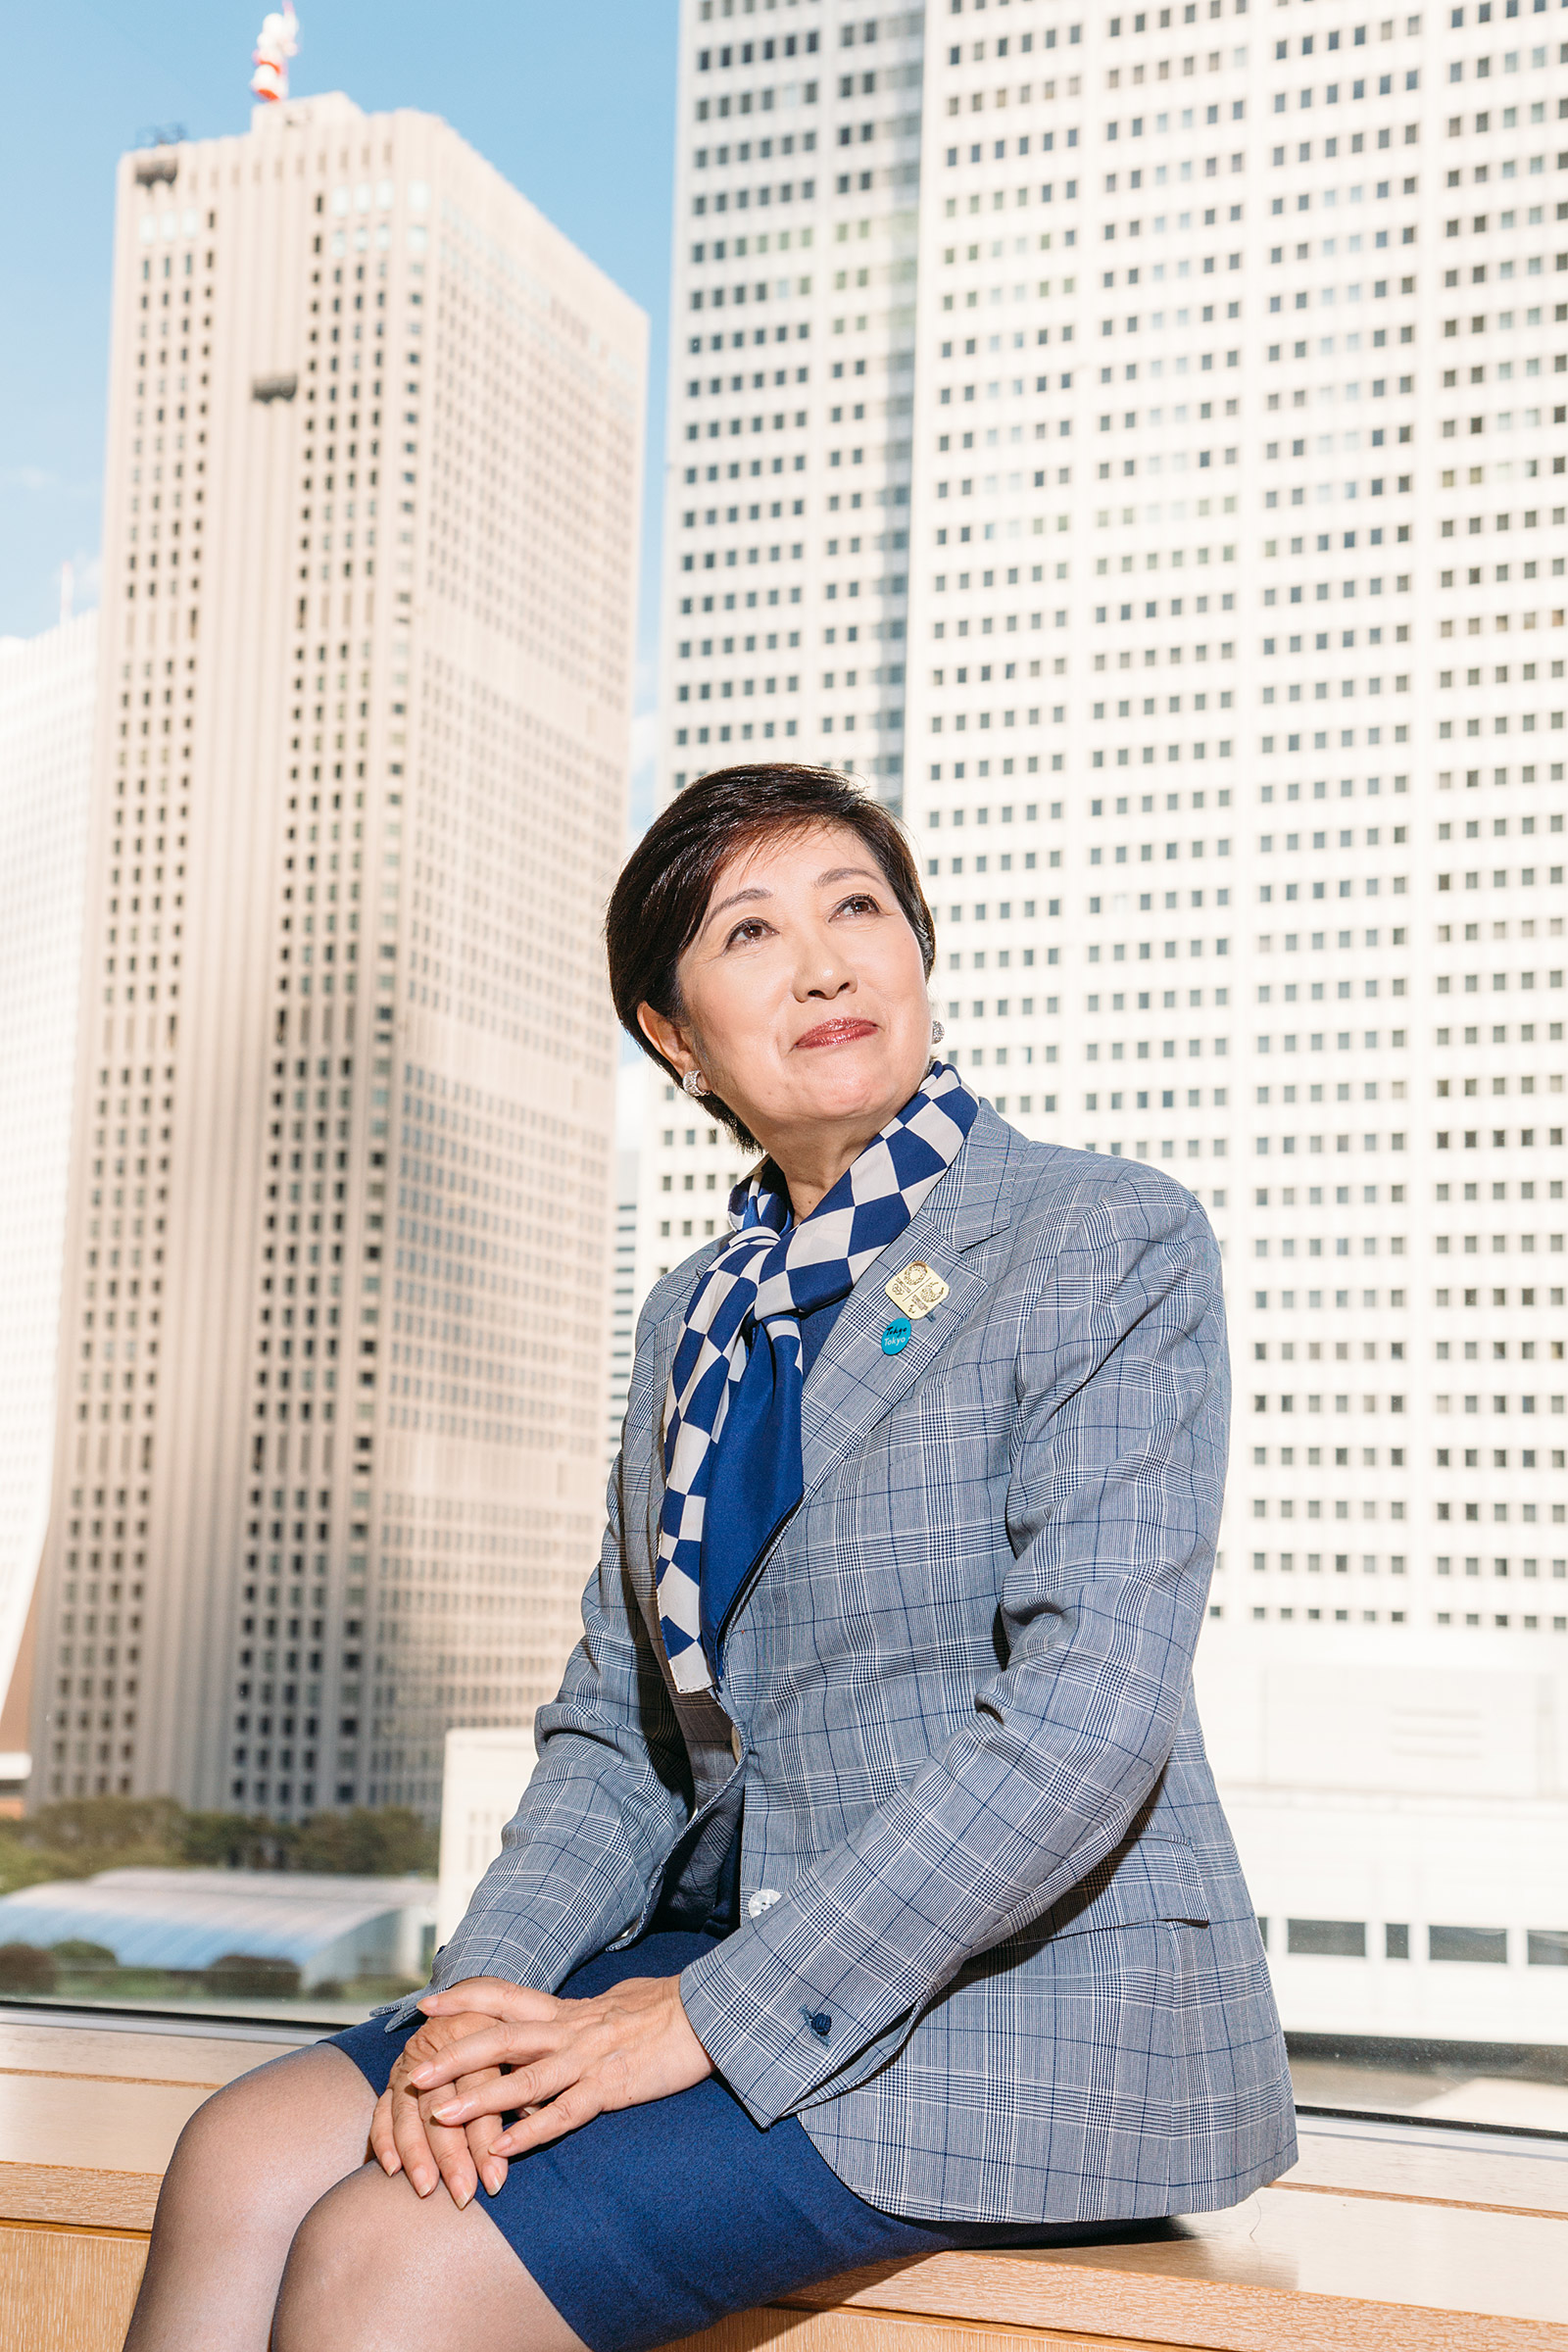 Yuriko Koike is a Japanese politician who currently serves as the Governor of Tokyo. Photographed OK!location is Tokyo Metropolitan Government Building, and the day is Sep 25 2019.